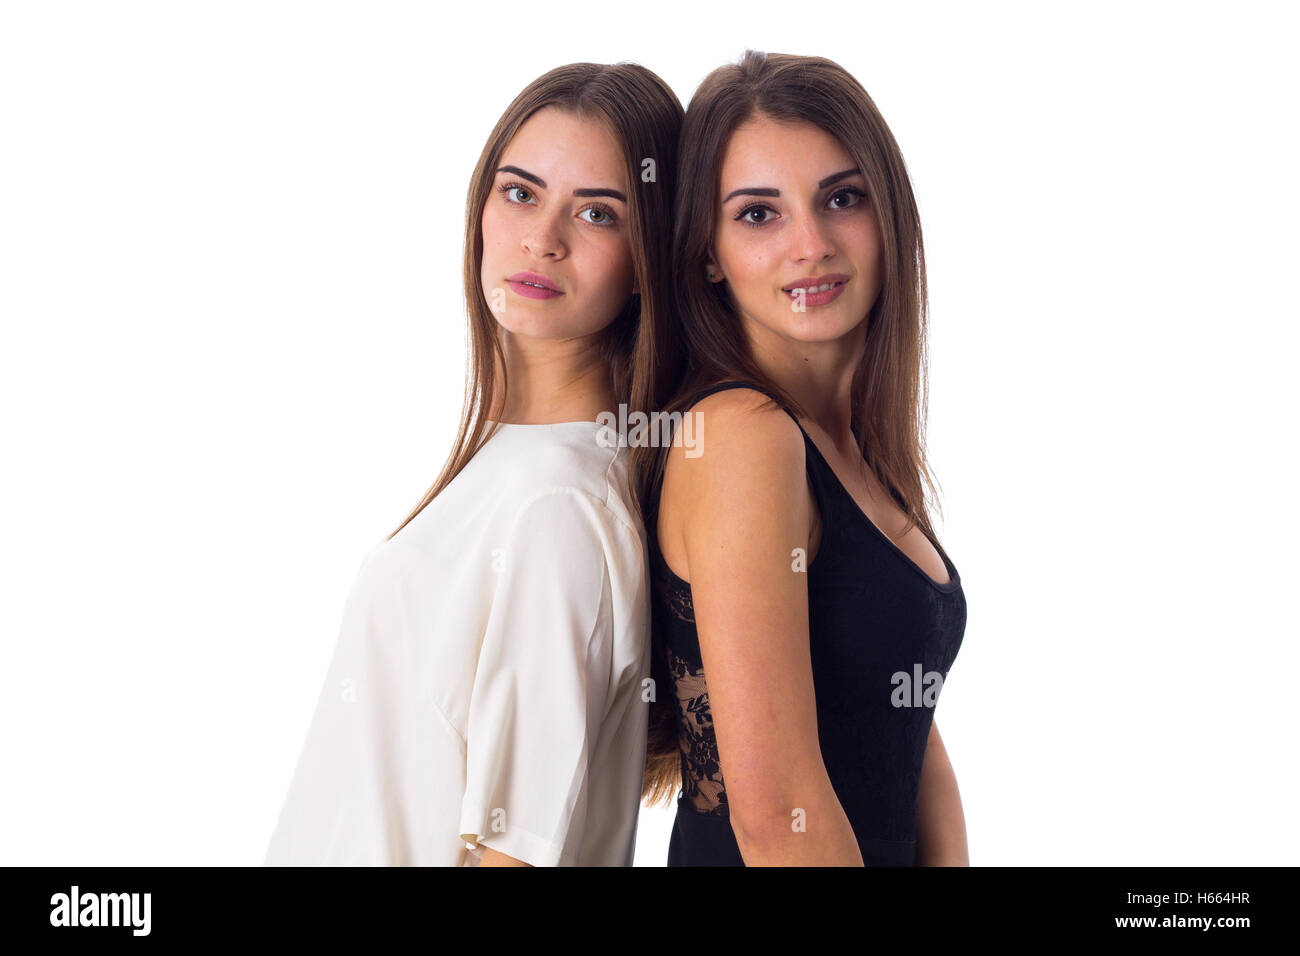 Two young woman standing back to back Stock Photo